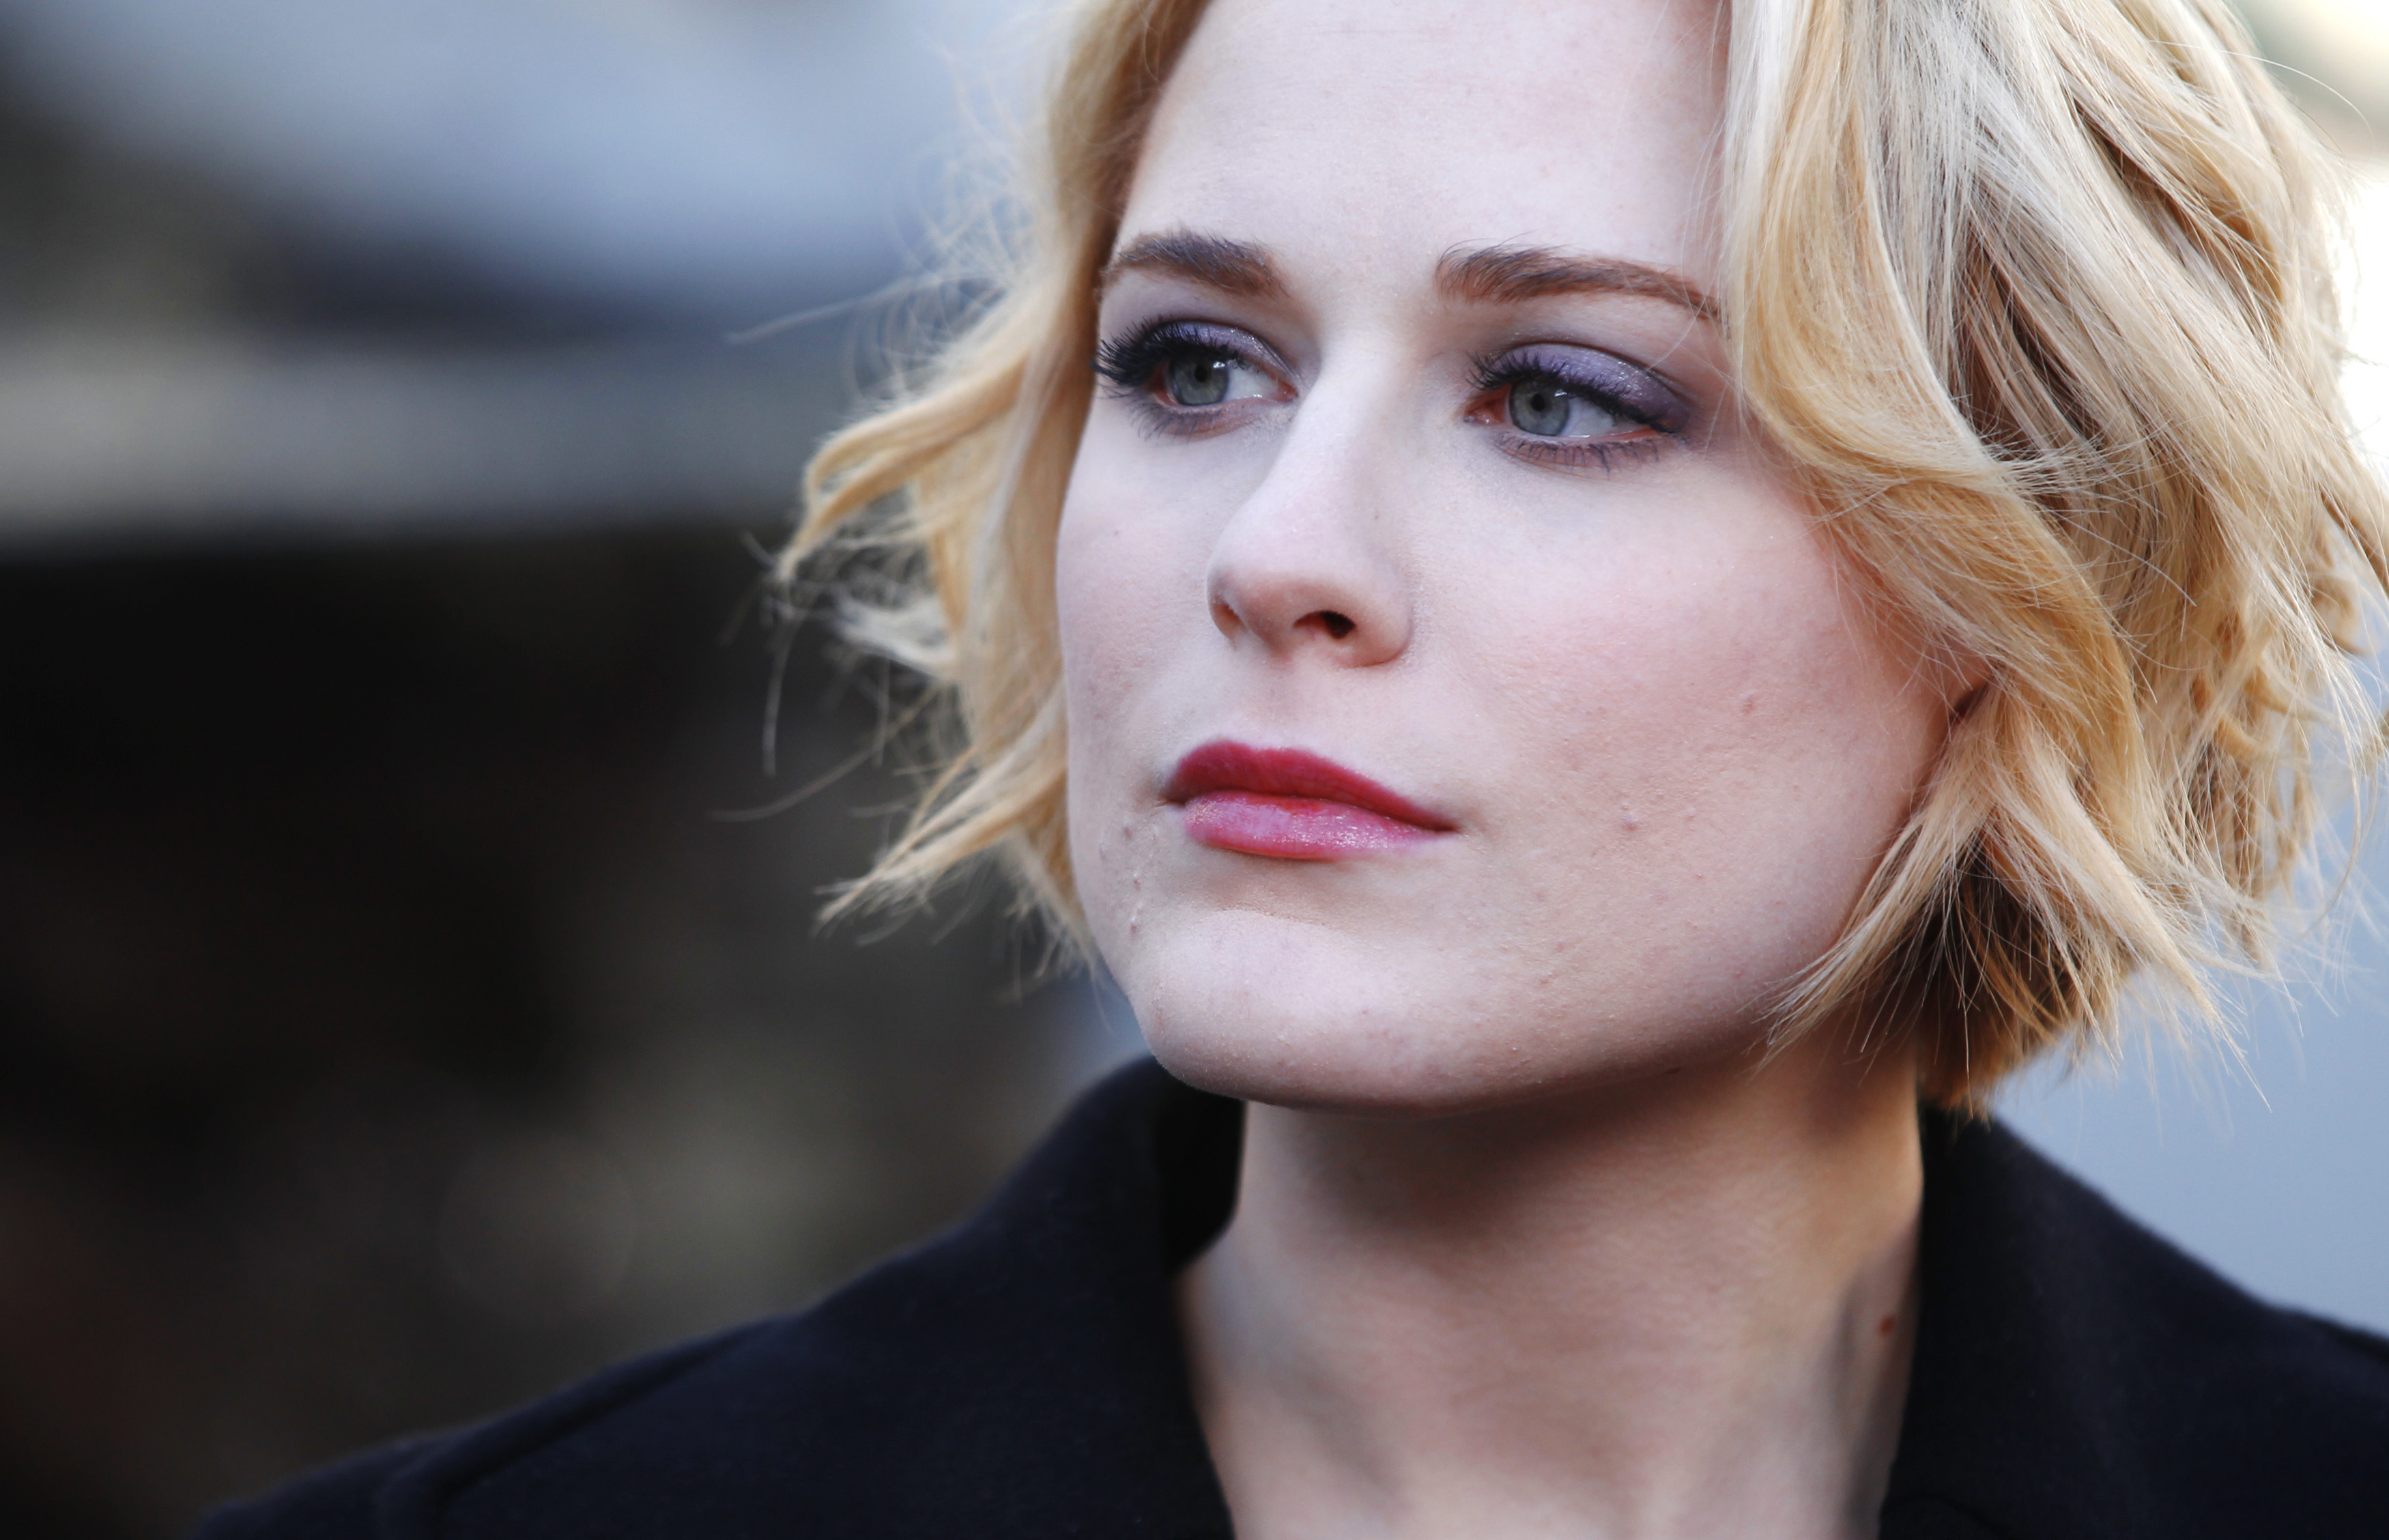 Actress Evan Rachel Wood from the movie "The Necessary Death of Charlie Countryman" looks on during the Sundance Film Festival in Park City, Utah